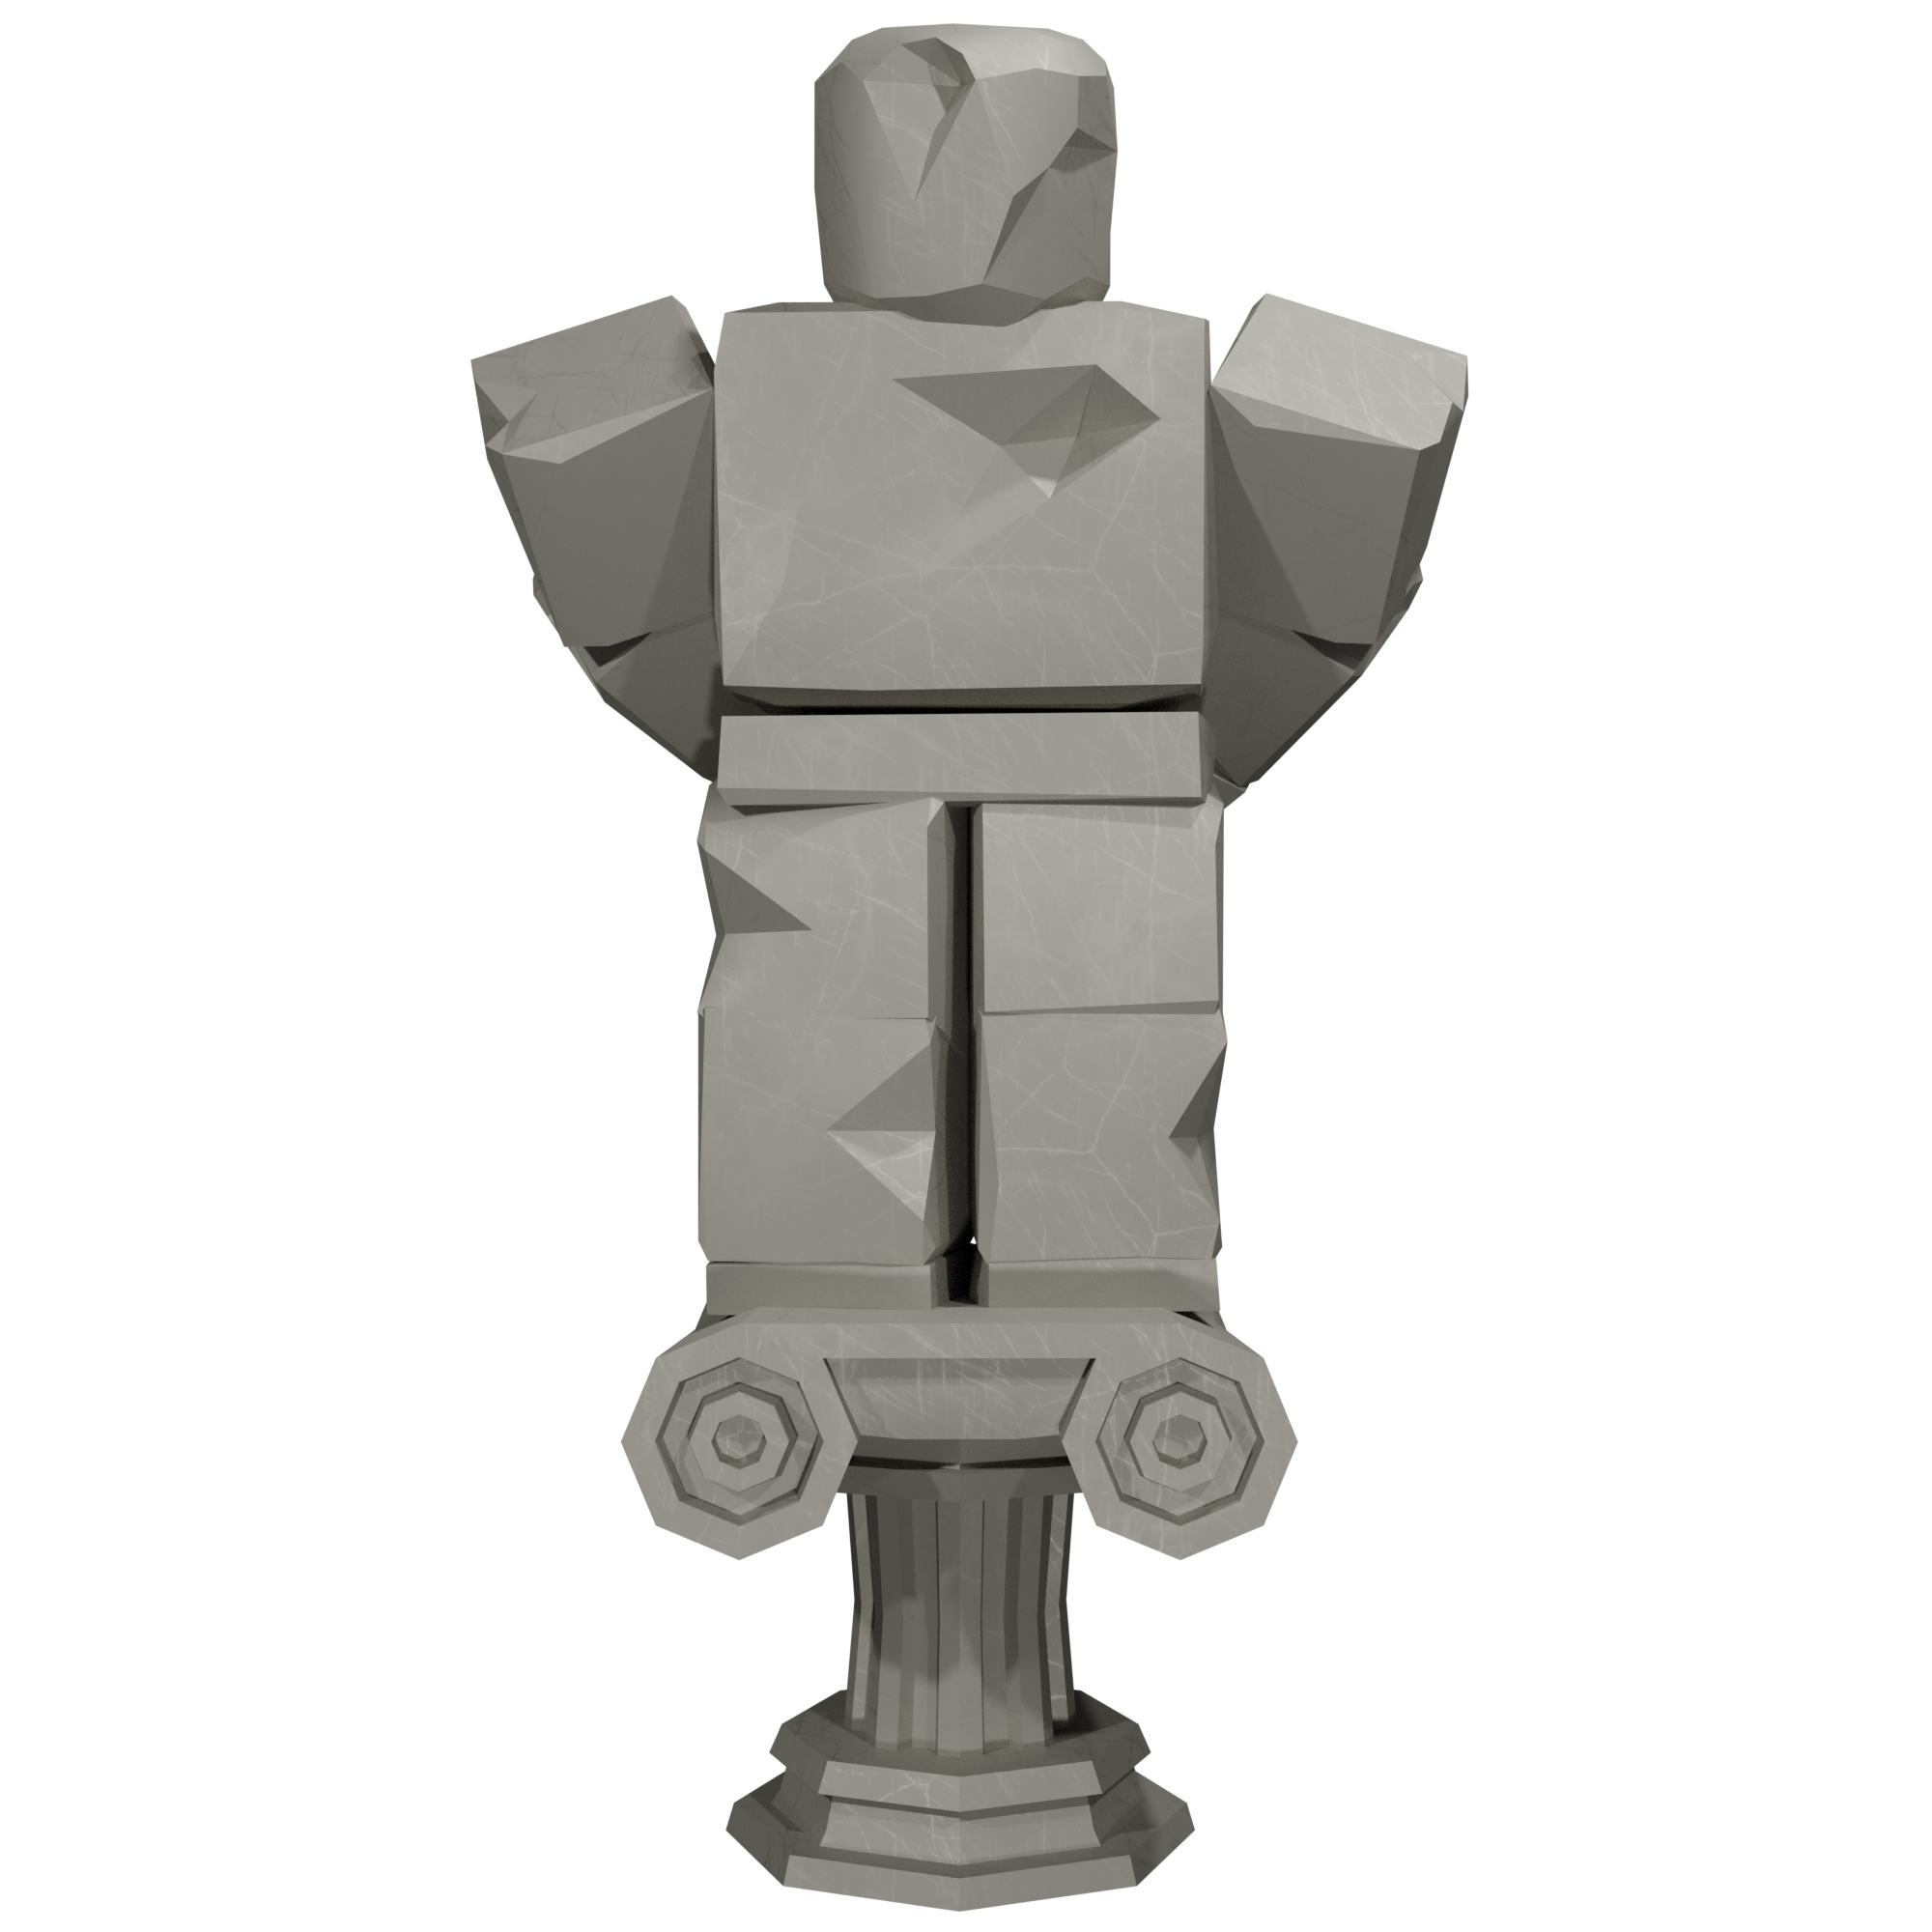 Make a statue of your roblox avatar in roblox studio by Genoterm